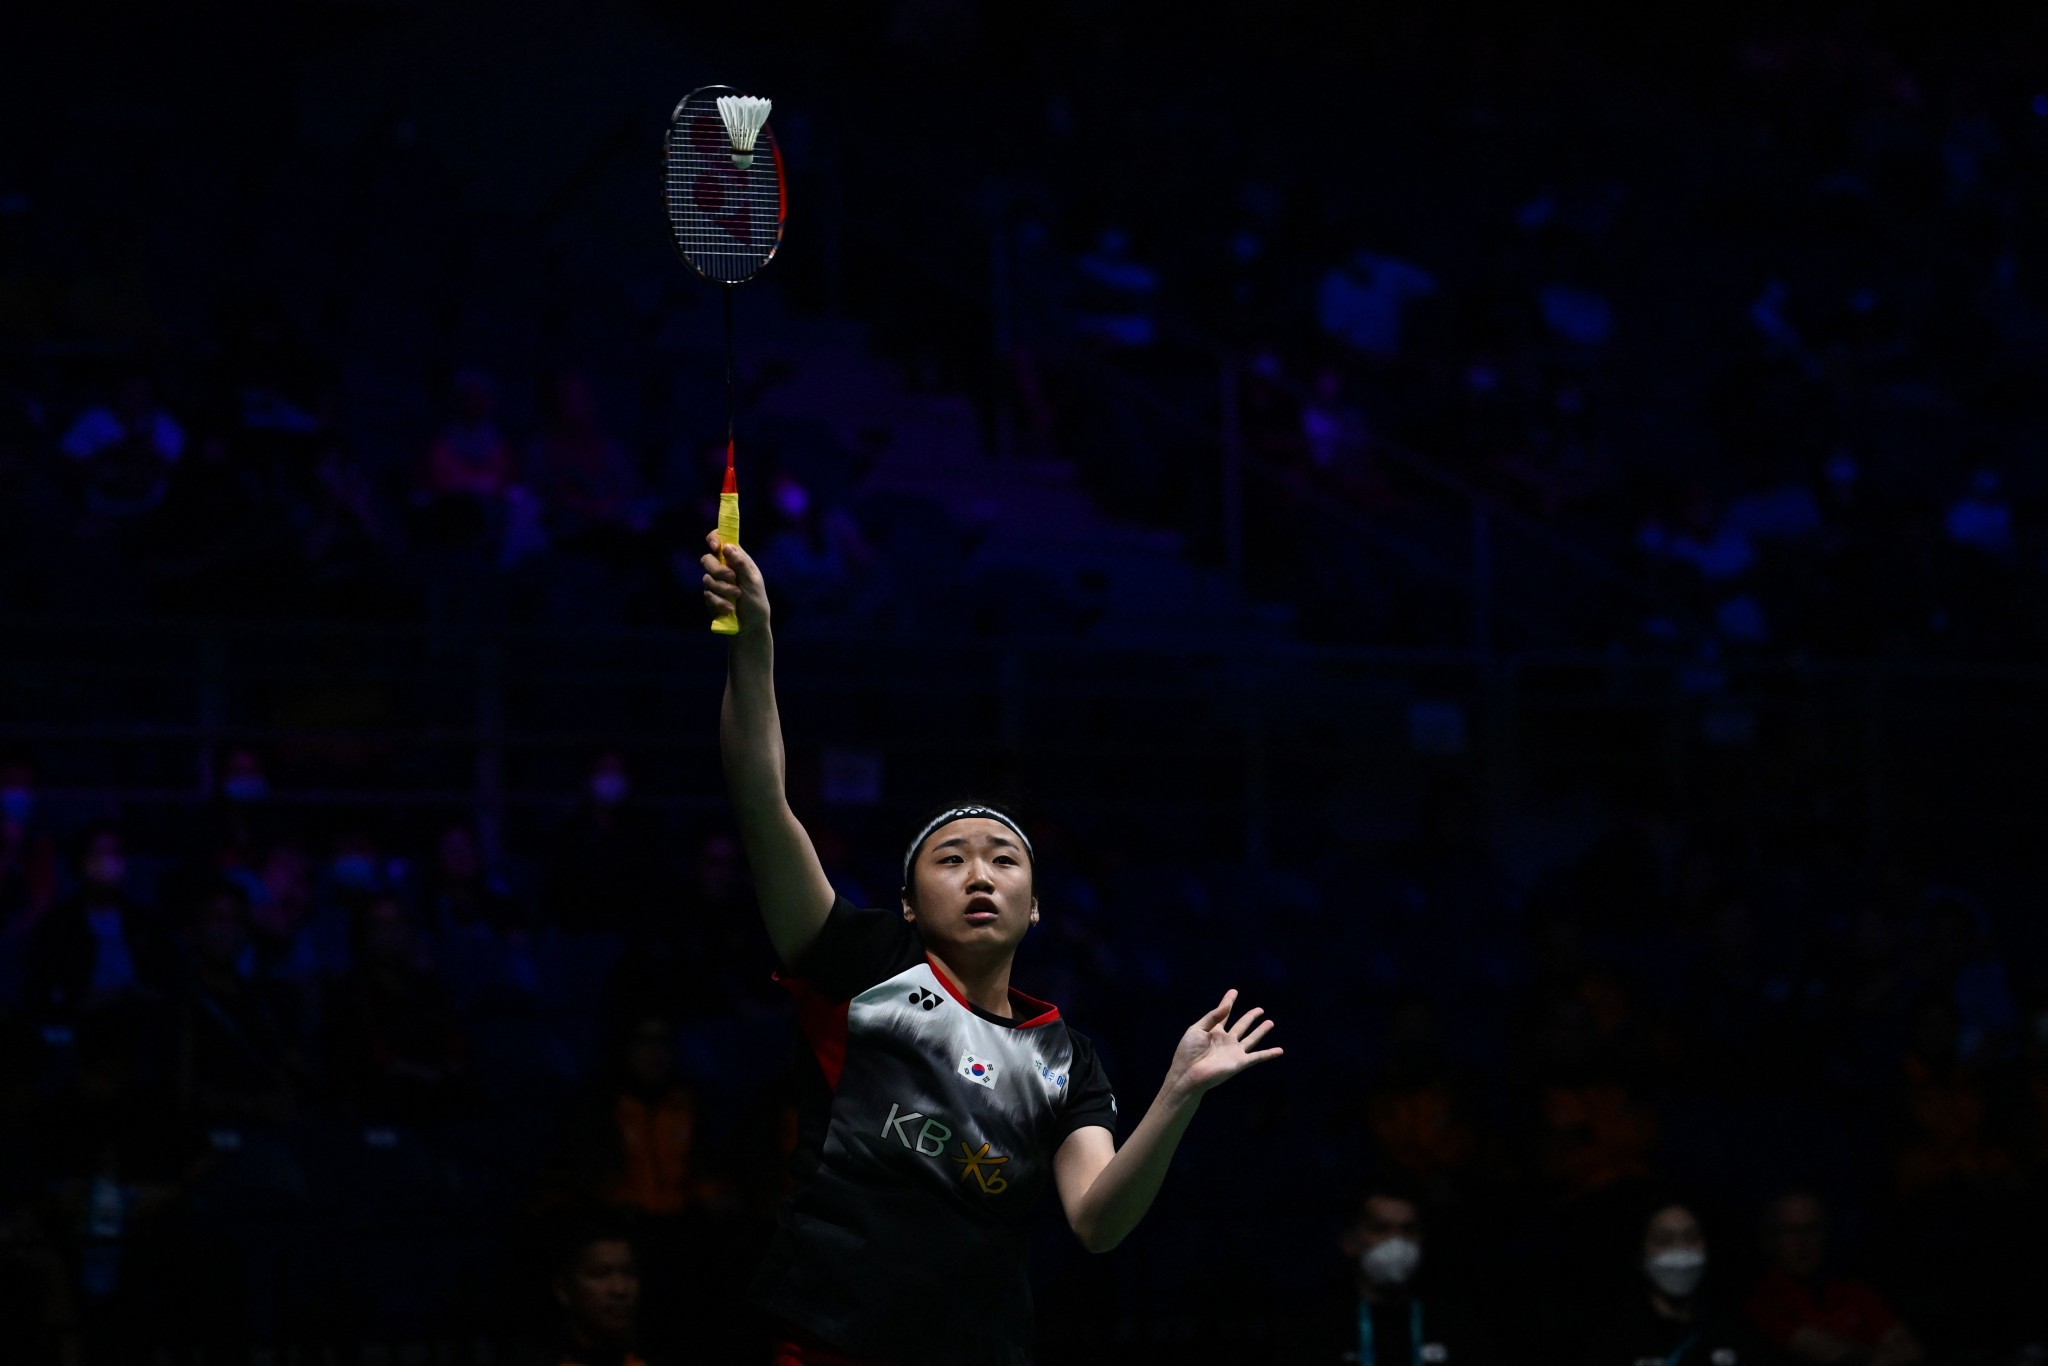 South Korea eyeing badminton medal in Hangzhou after 2018 Asian Games disappointment 